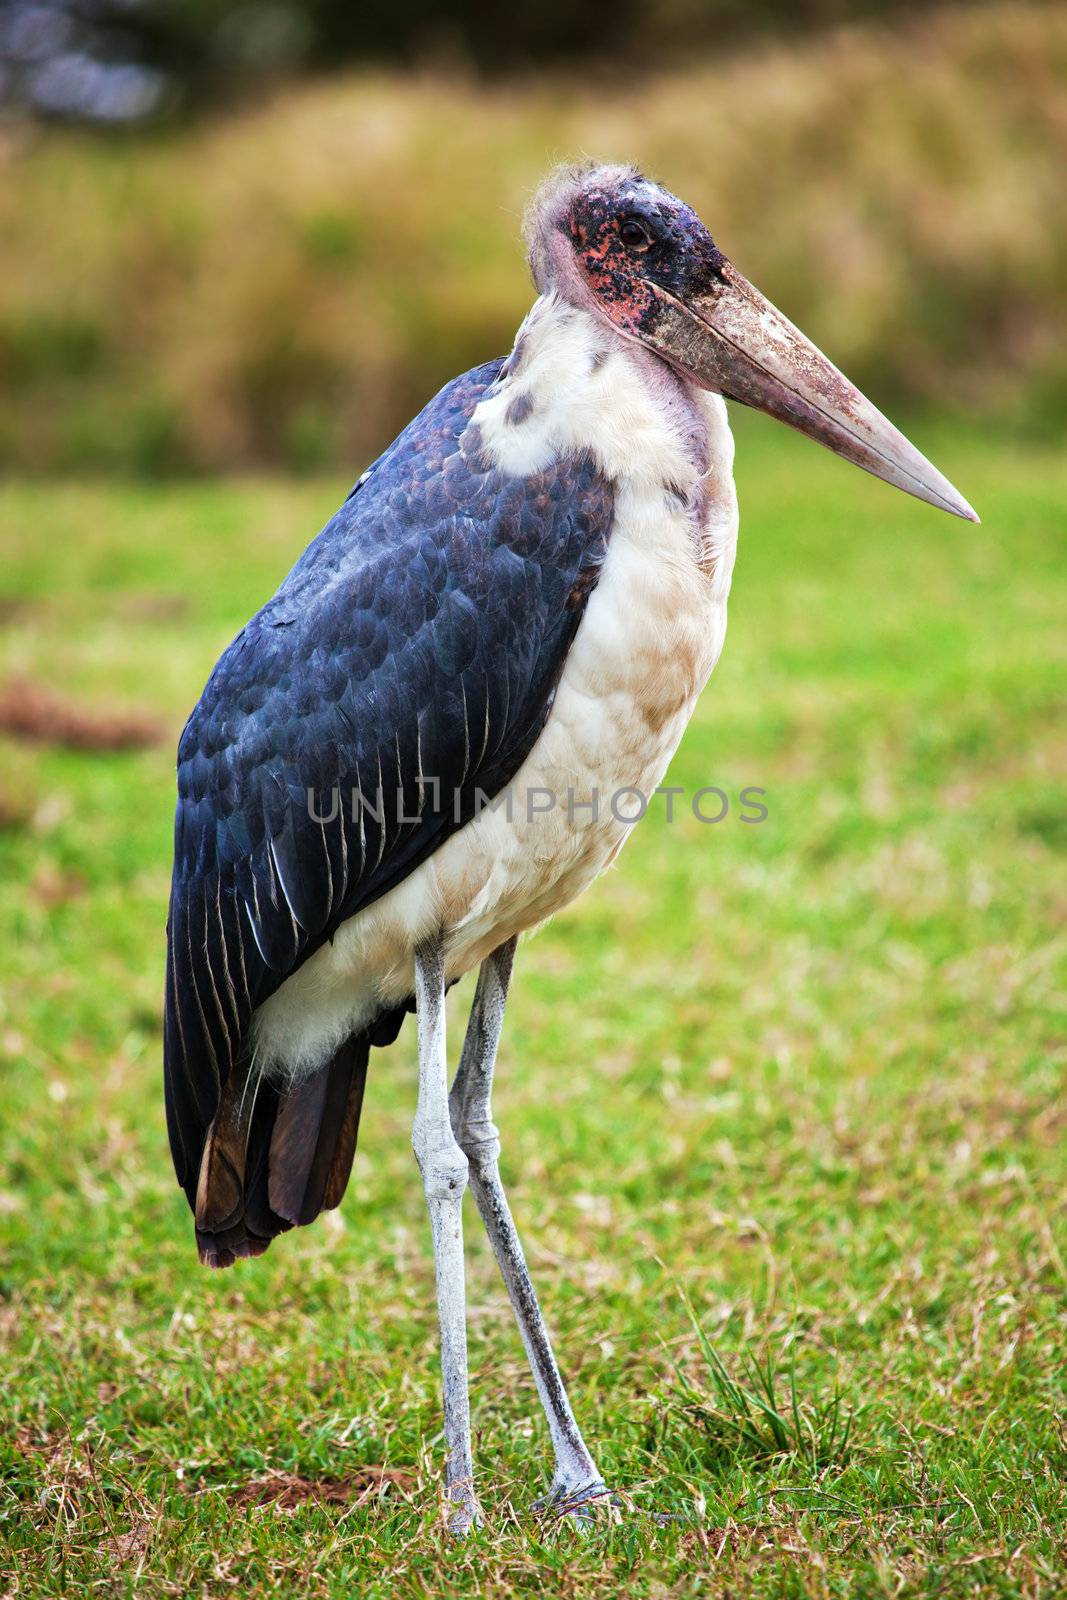 The Marabou Stork in Tanzania, Africa by photocreo